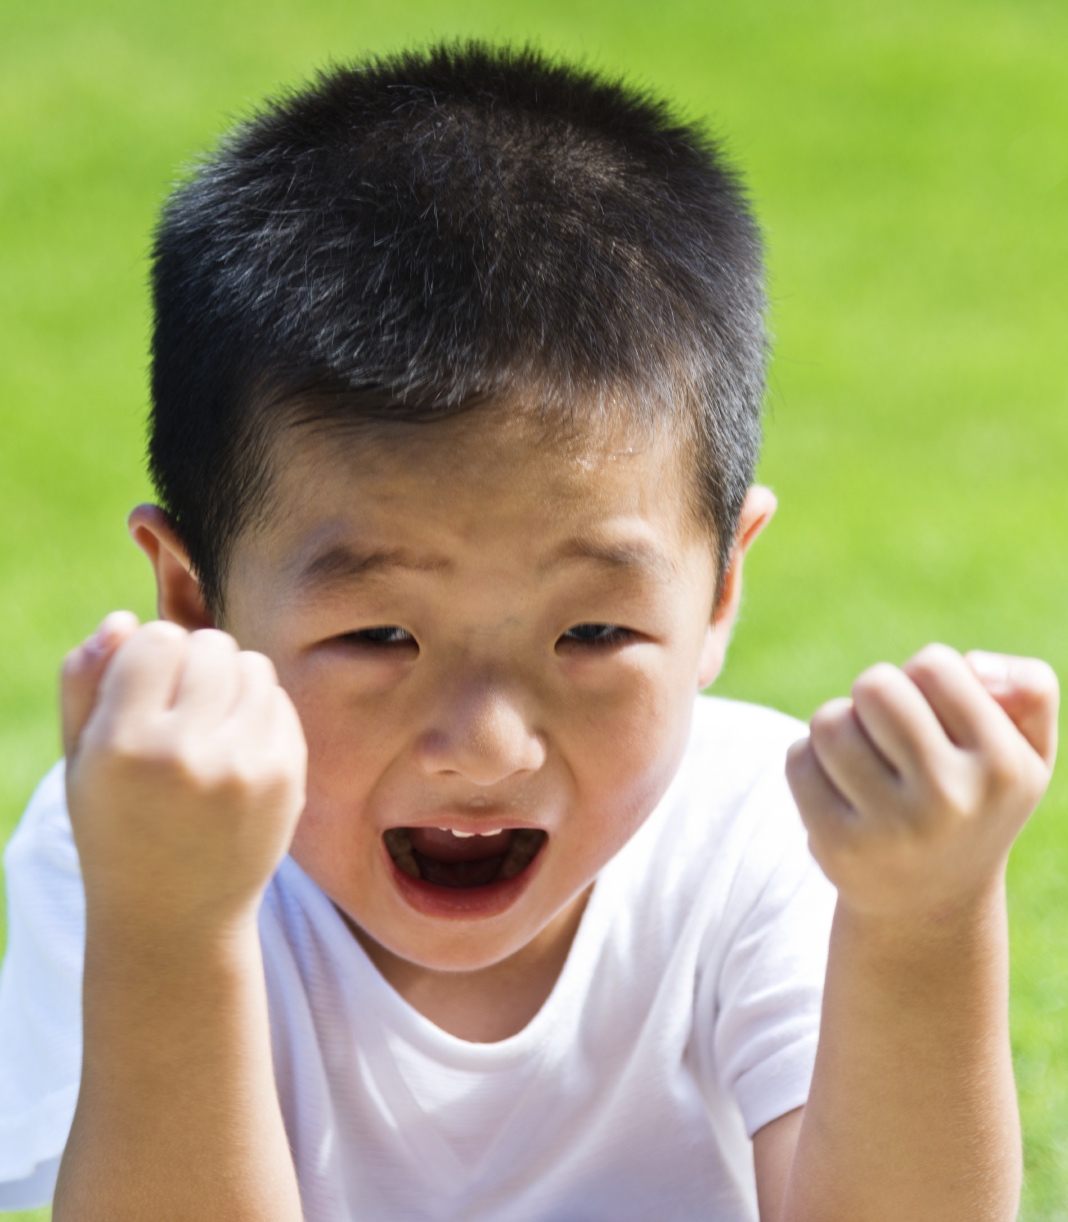 When Your Child Gets Angry: The Crash Course